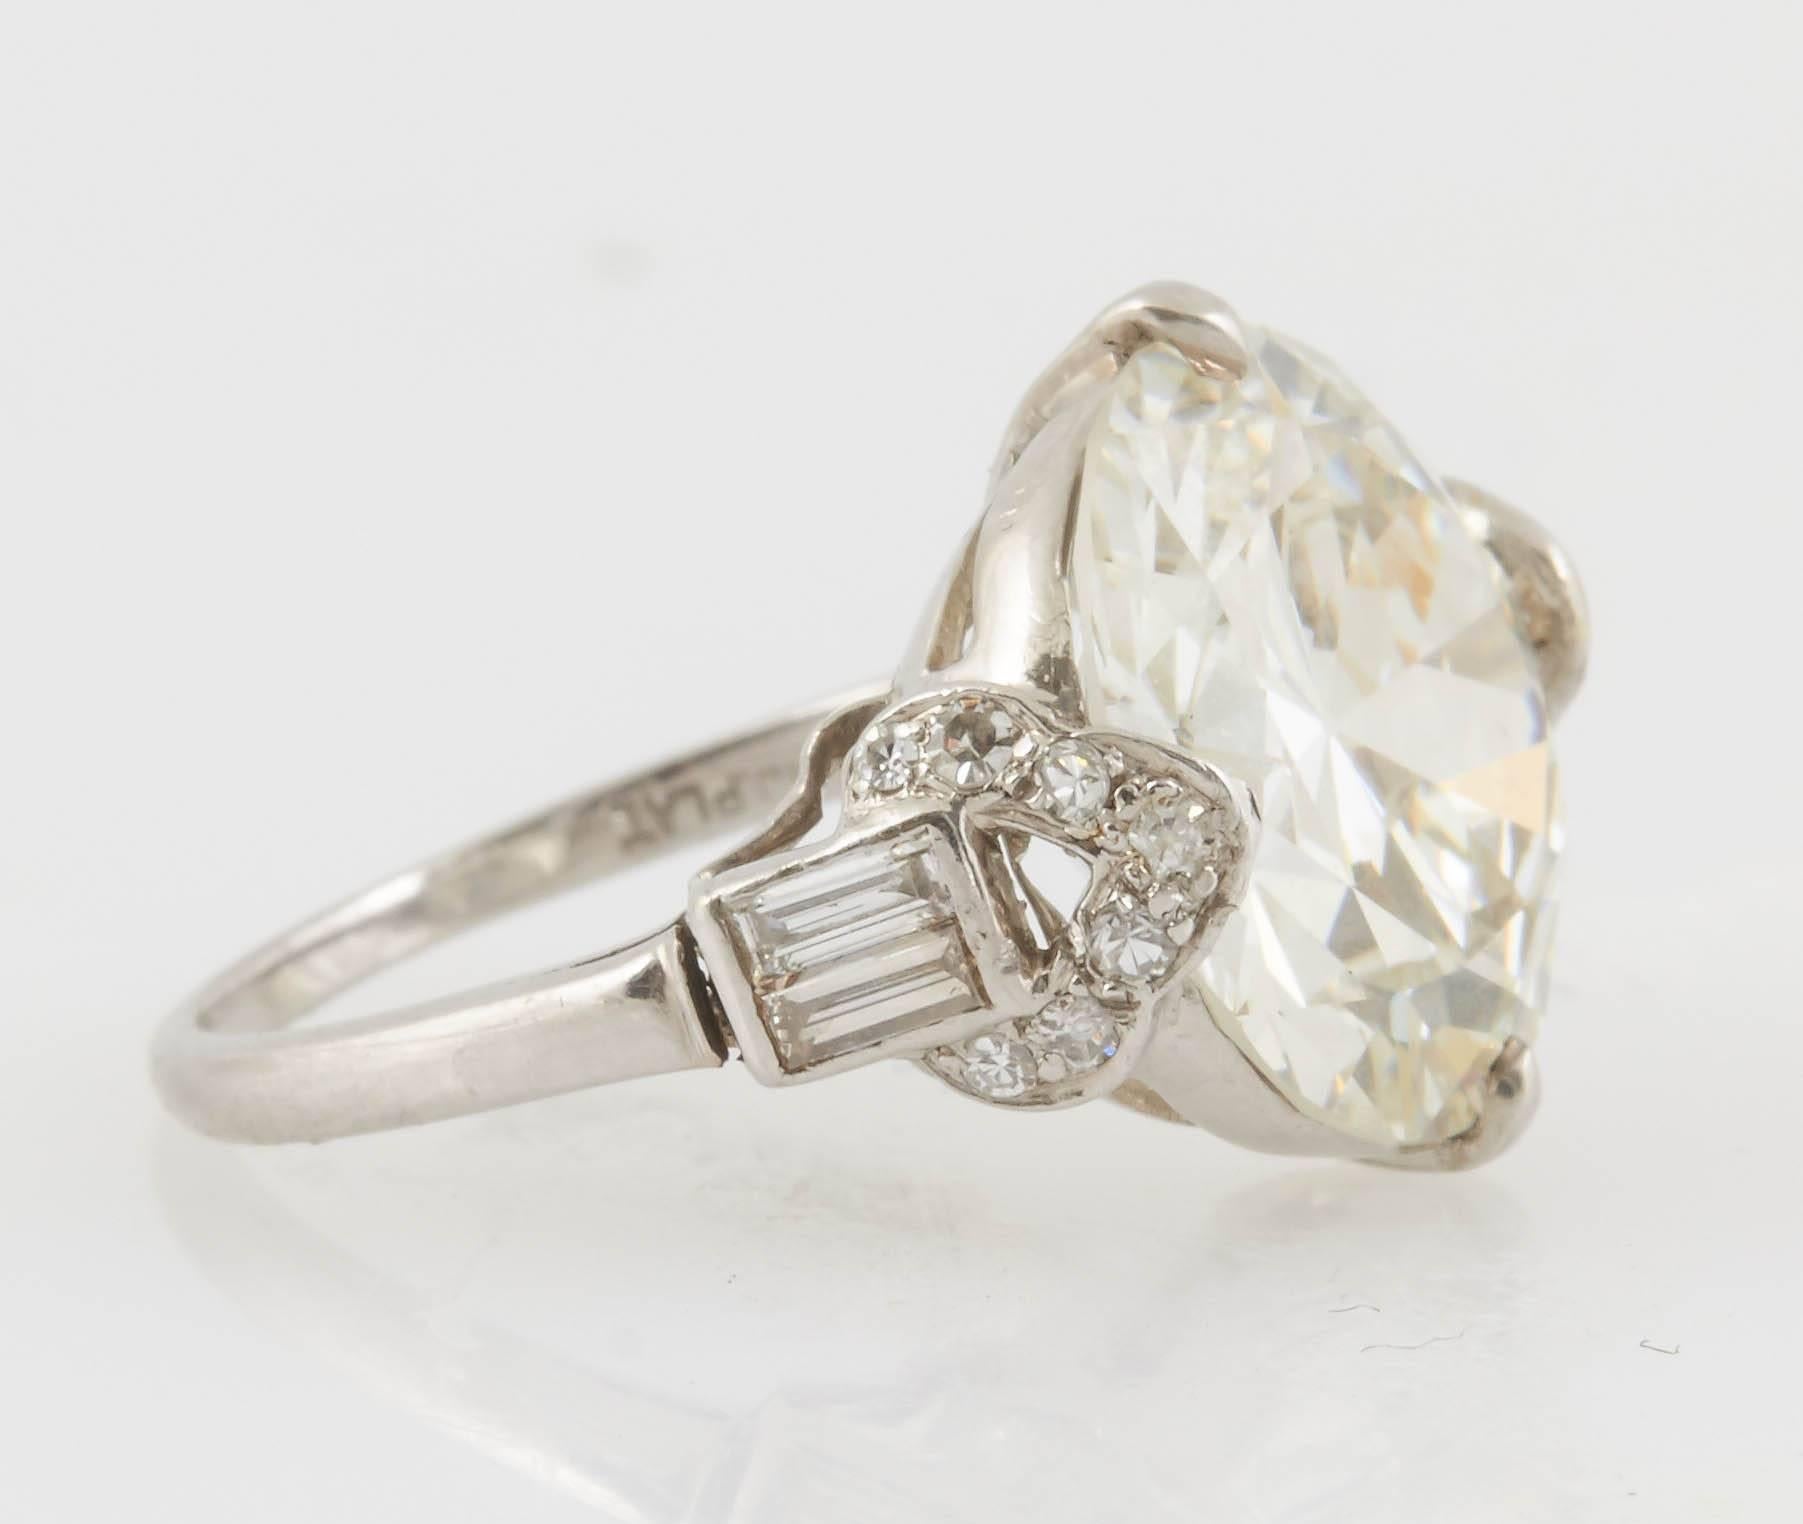 Antique Art Deco engagement ring, finely crafted in platinum, with GIA certified Old European cut diamond at the center, weighing 7.12 Carat, J color VS2 clarity. Accenetd with baguette and single cut diamonds. 